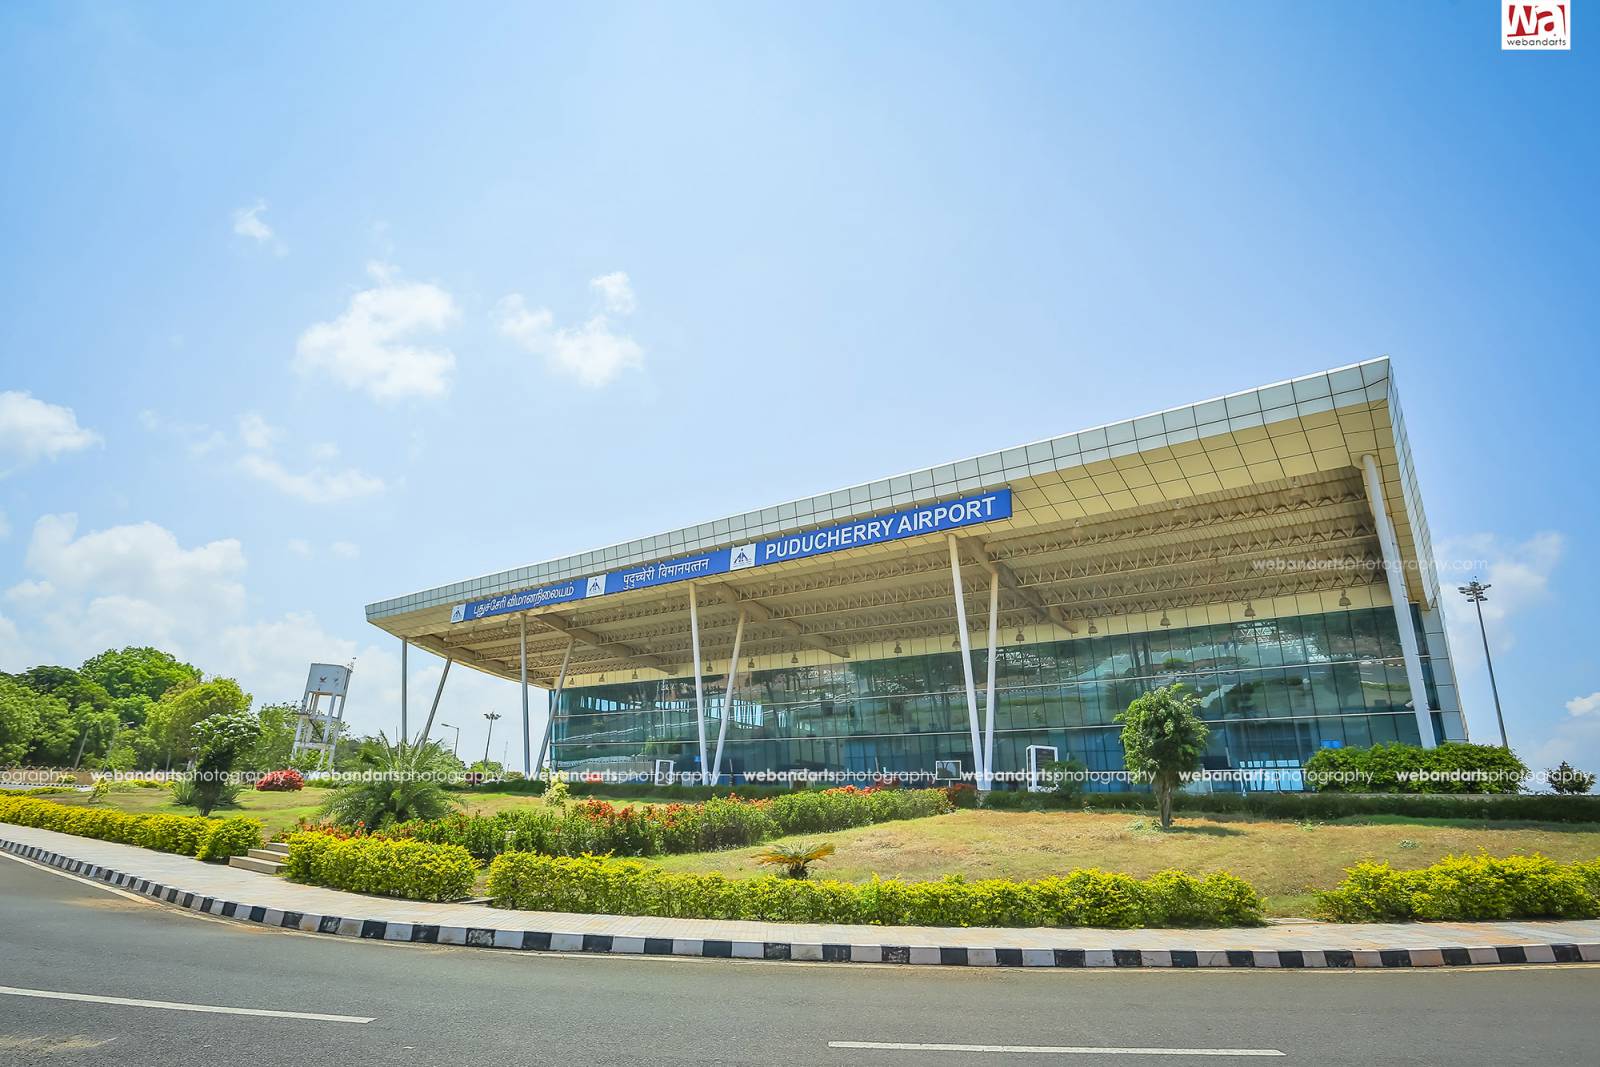 commercial_shoots_photography_pondicherry_airport-917